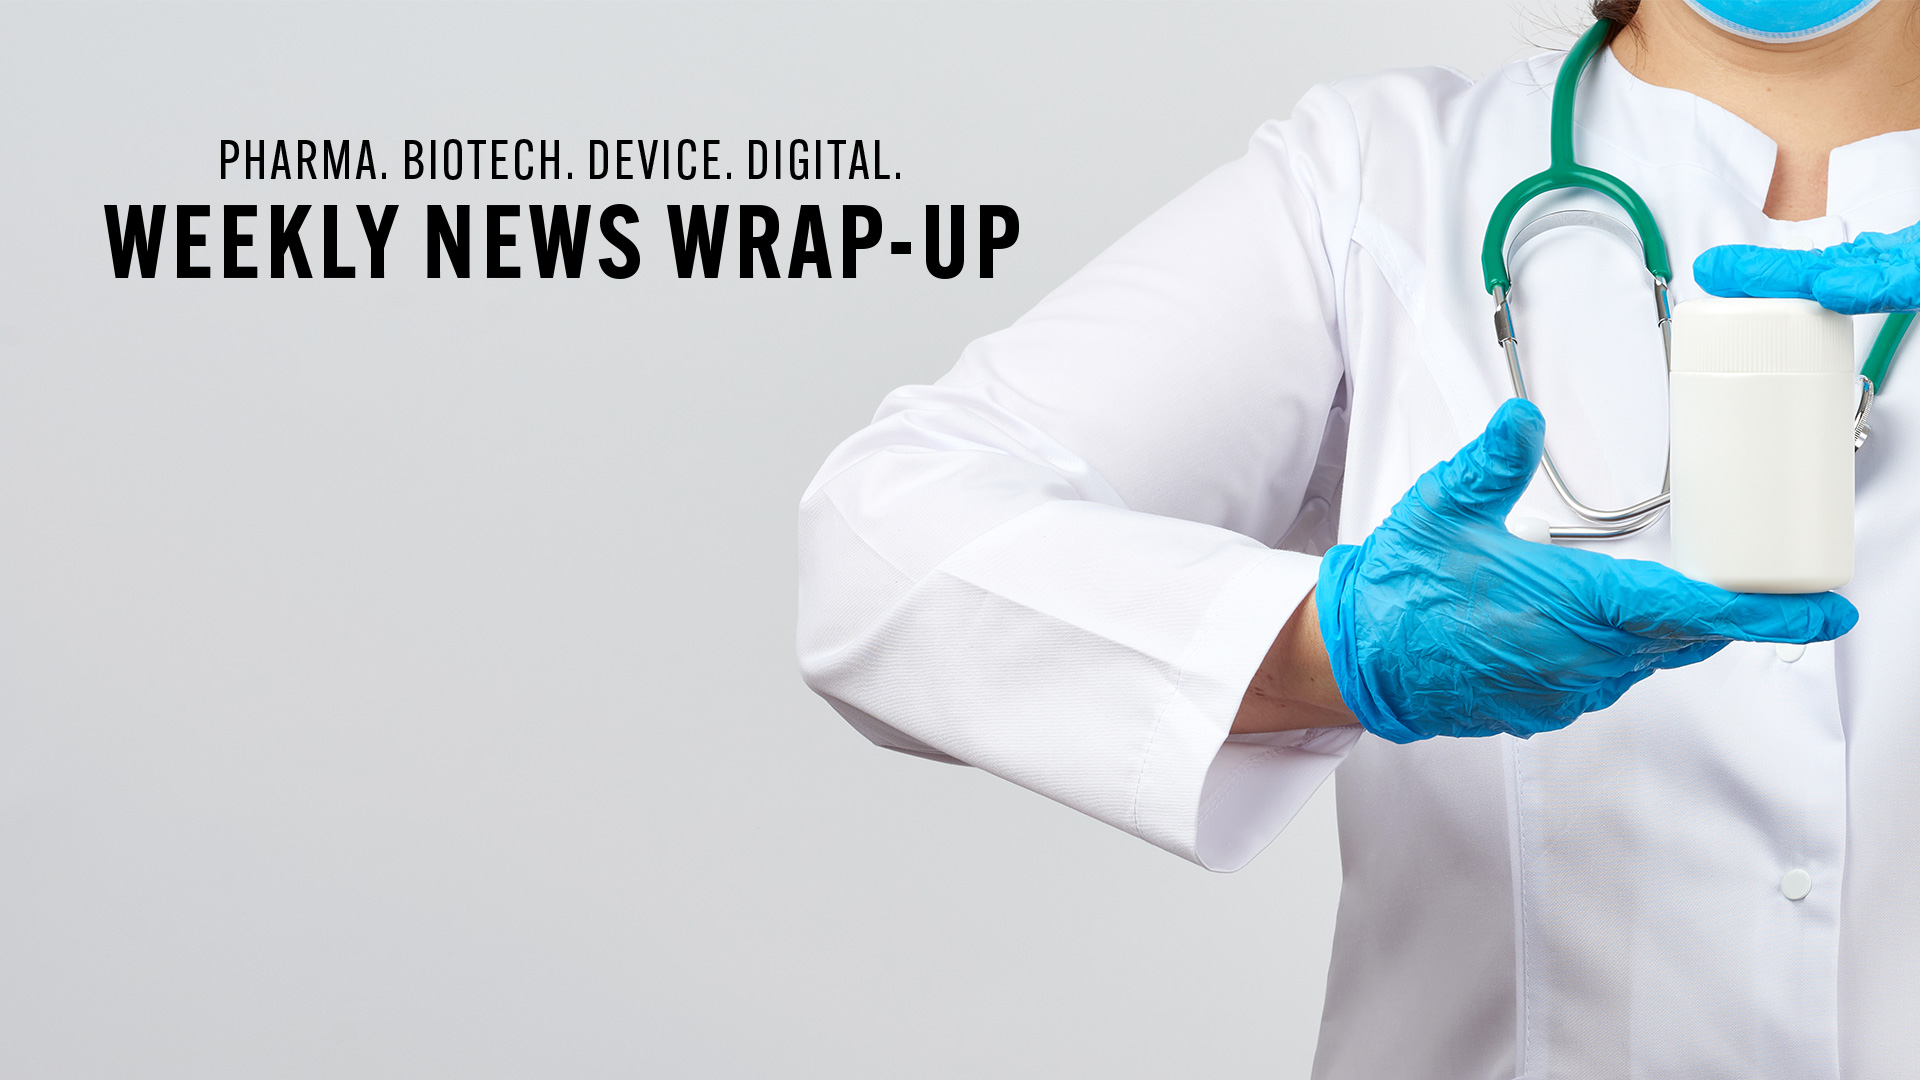 Healthcare Industry News Weekly Wrap-Up: February 17, 2023